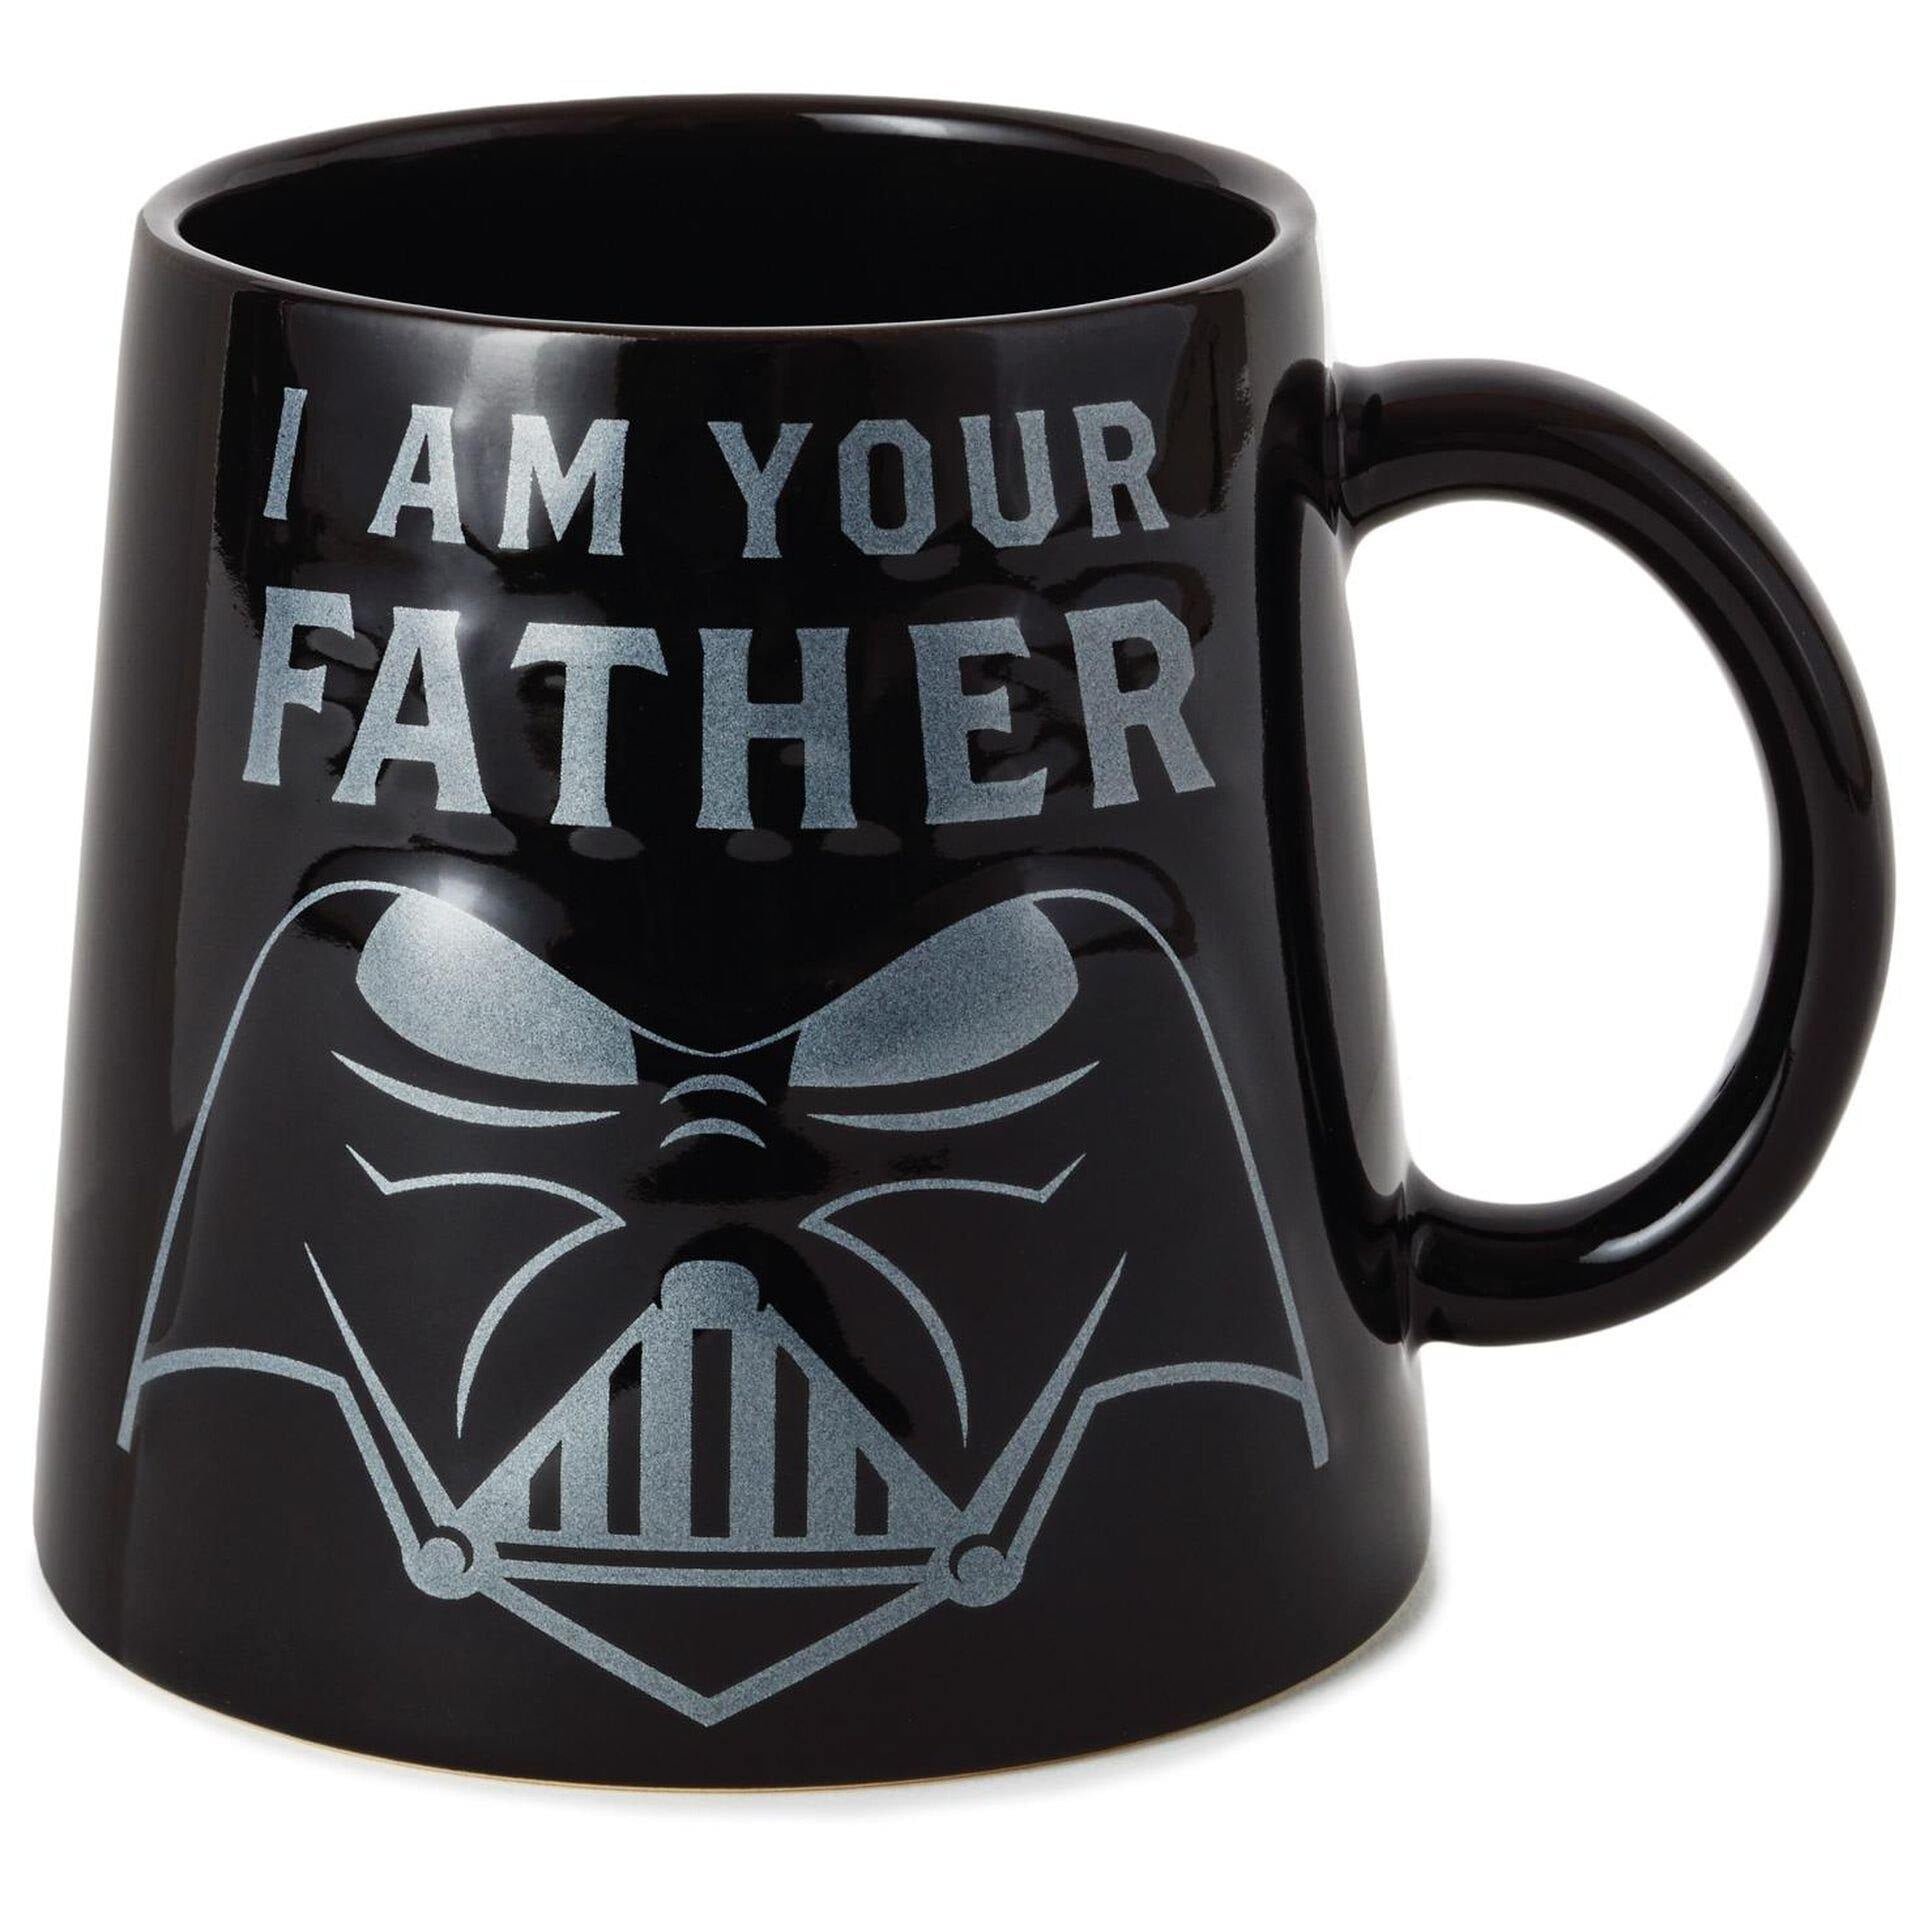 Etched Glass Star Wars Beer Mug “You Are My Father” Darth Vader